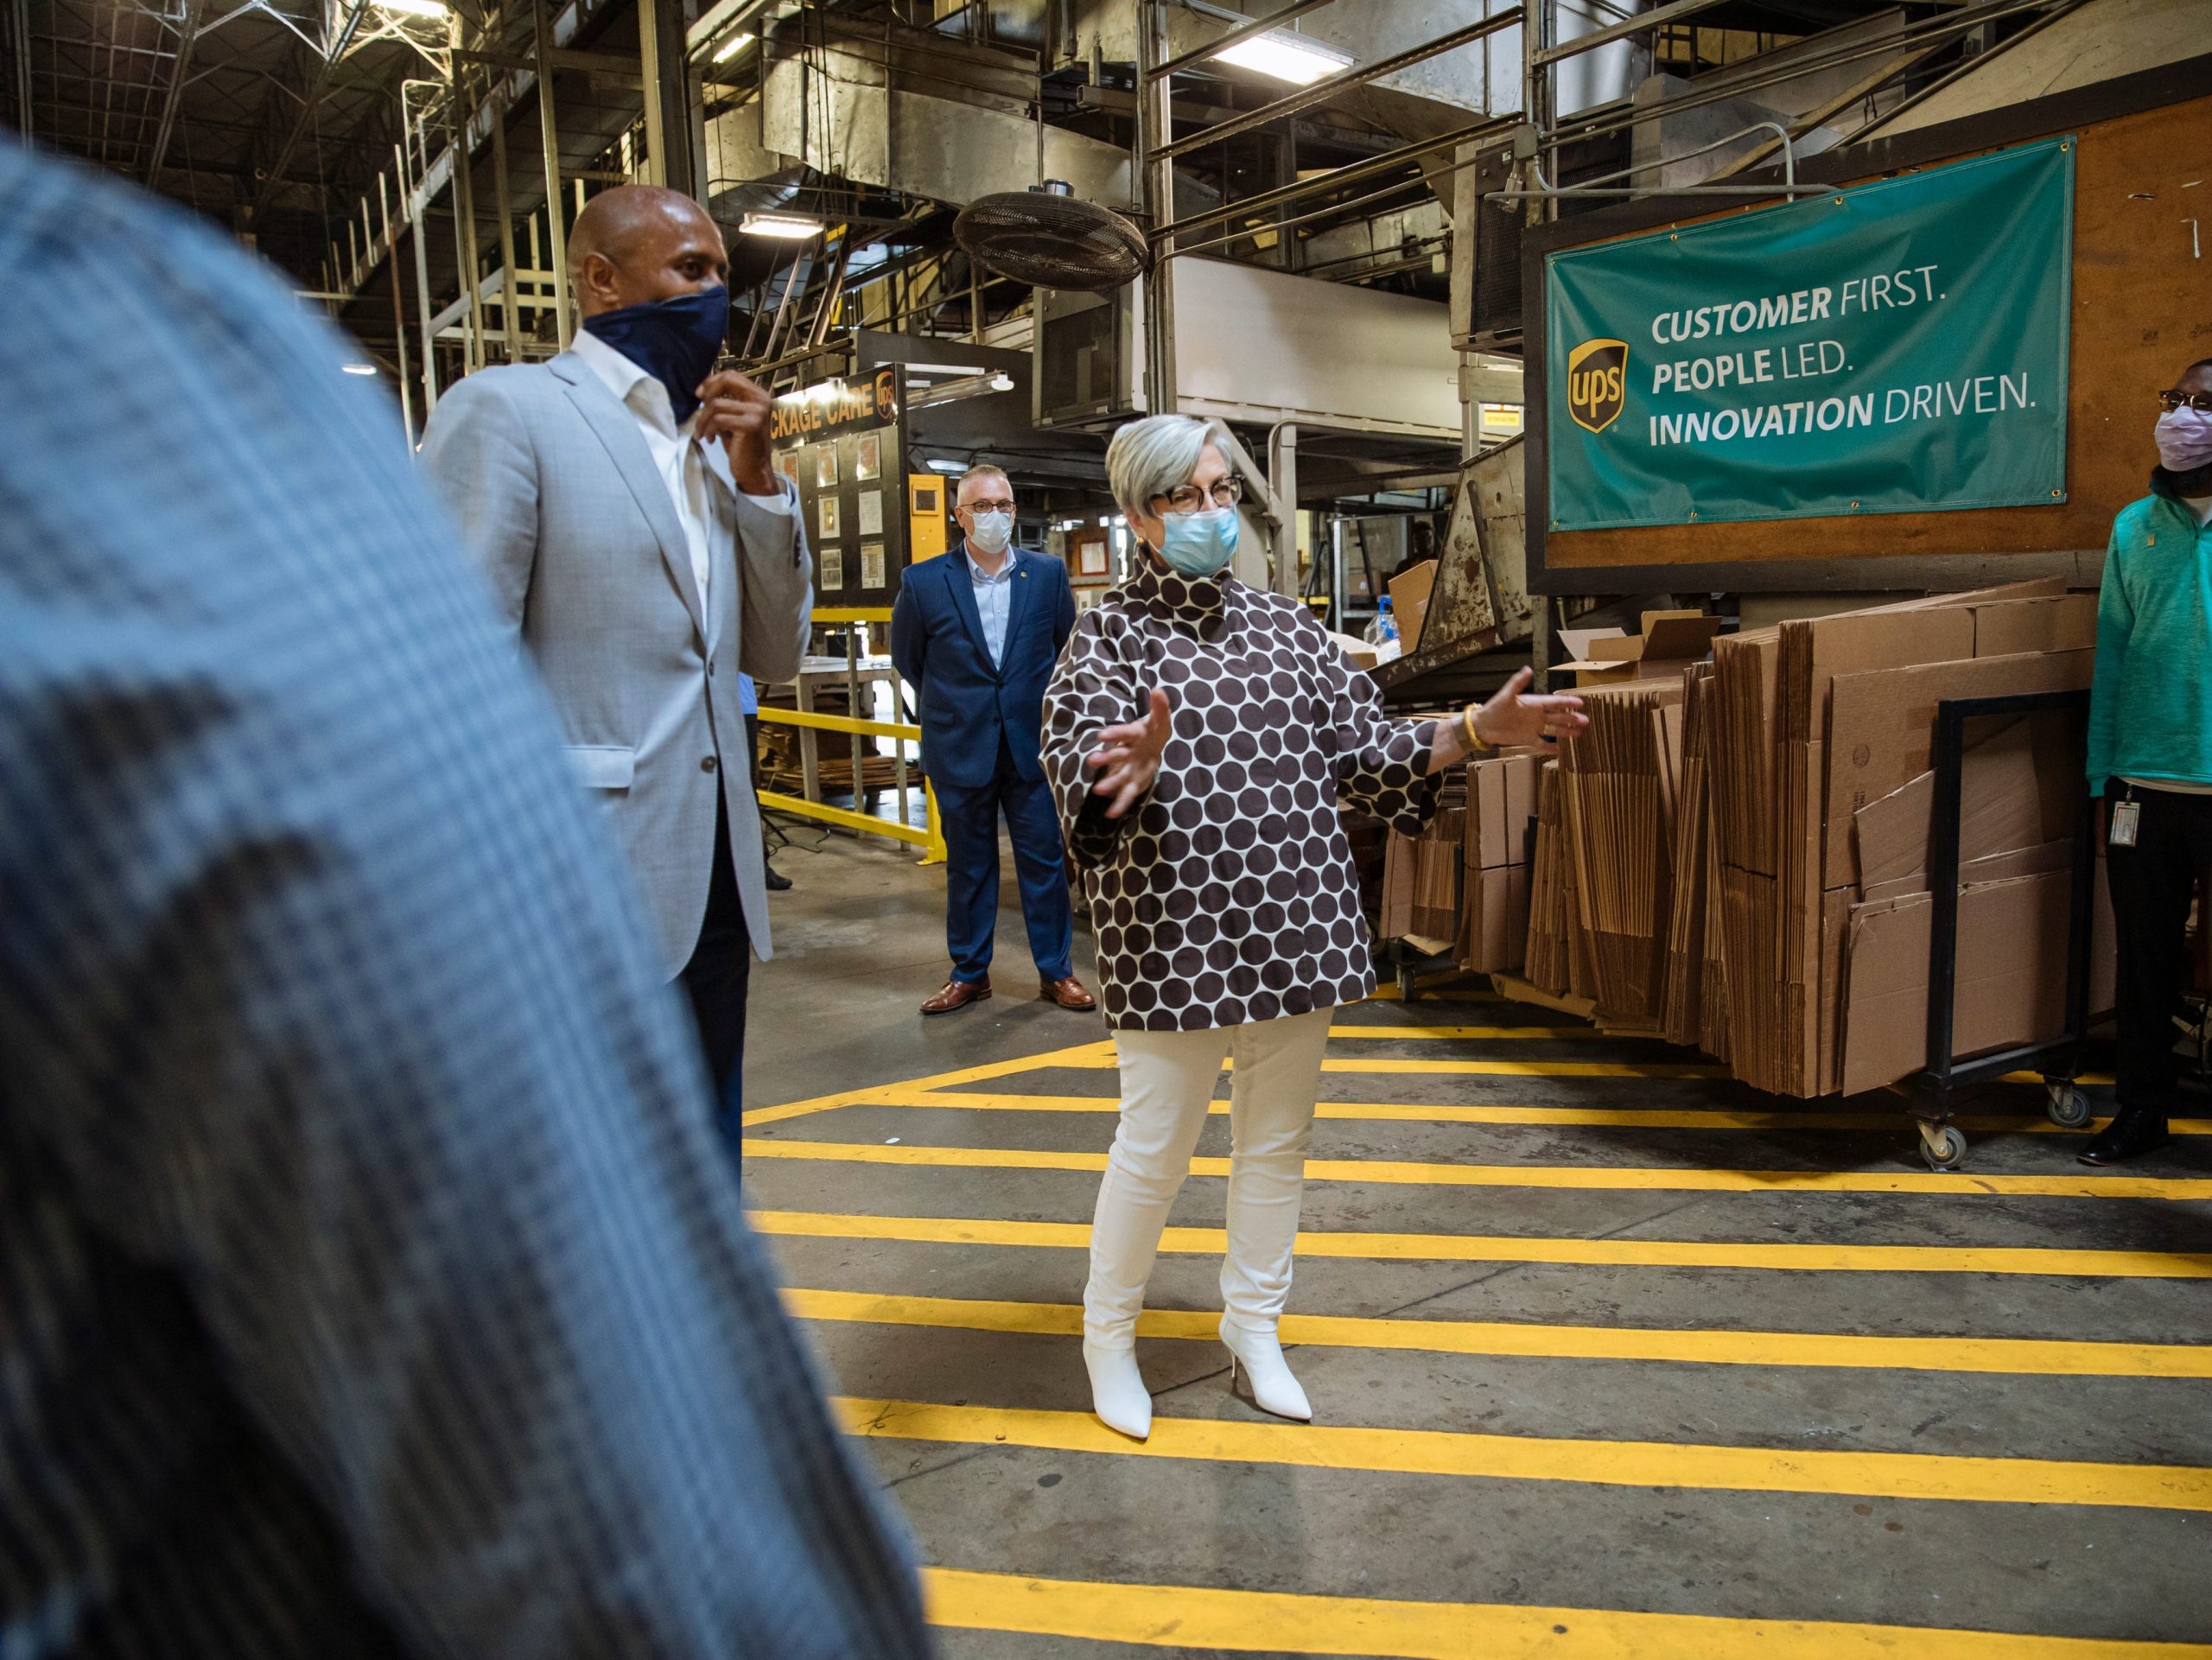 UPS CEO Carol Tomé speaks before a group at a UPS faciltity in Pleasantdale, Georgia.